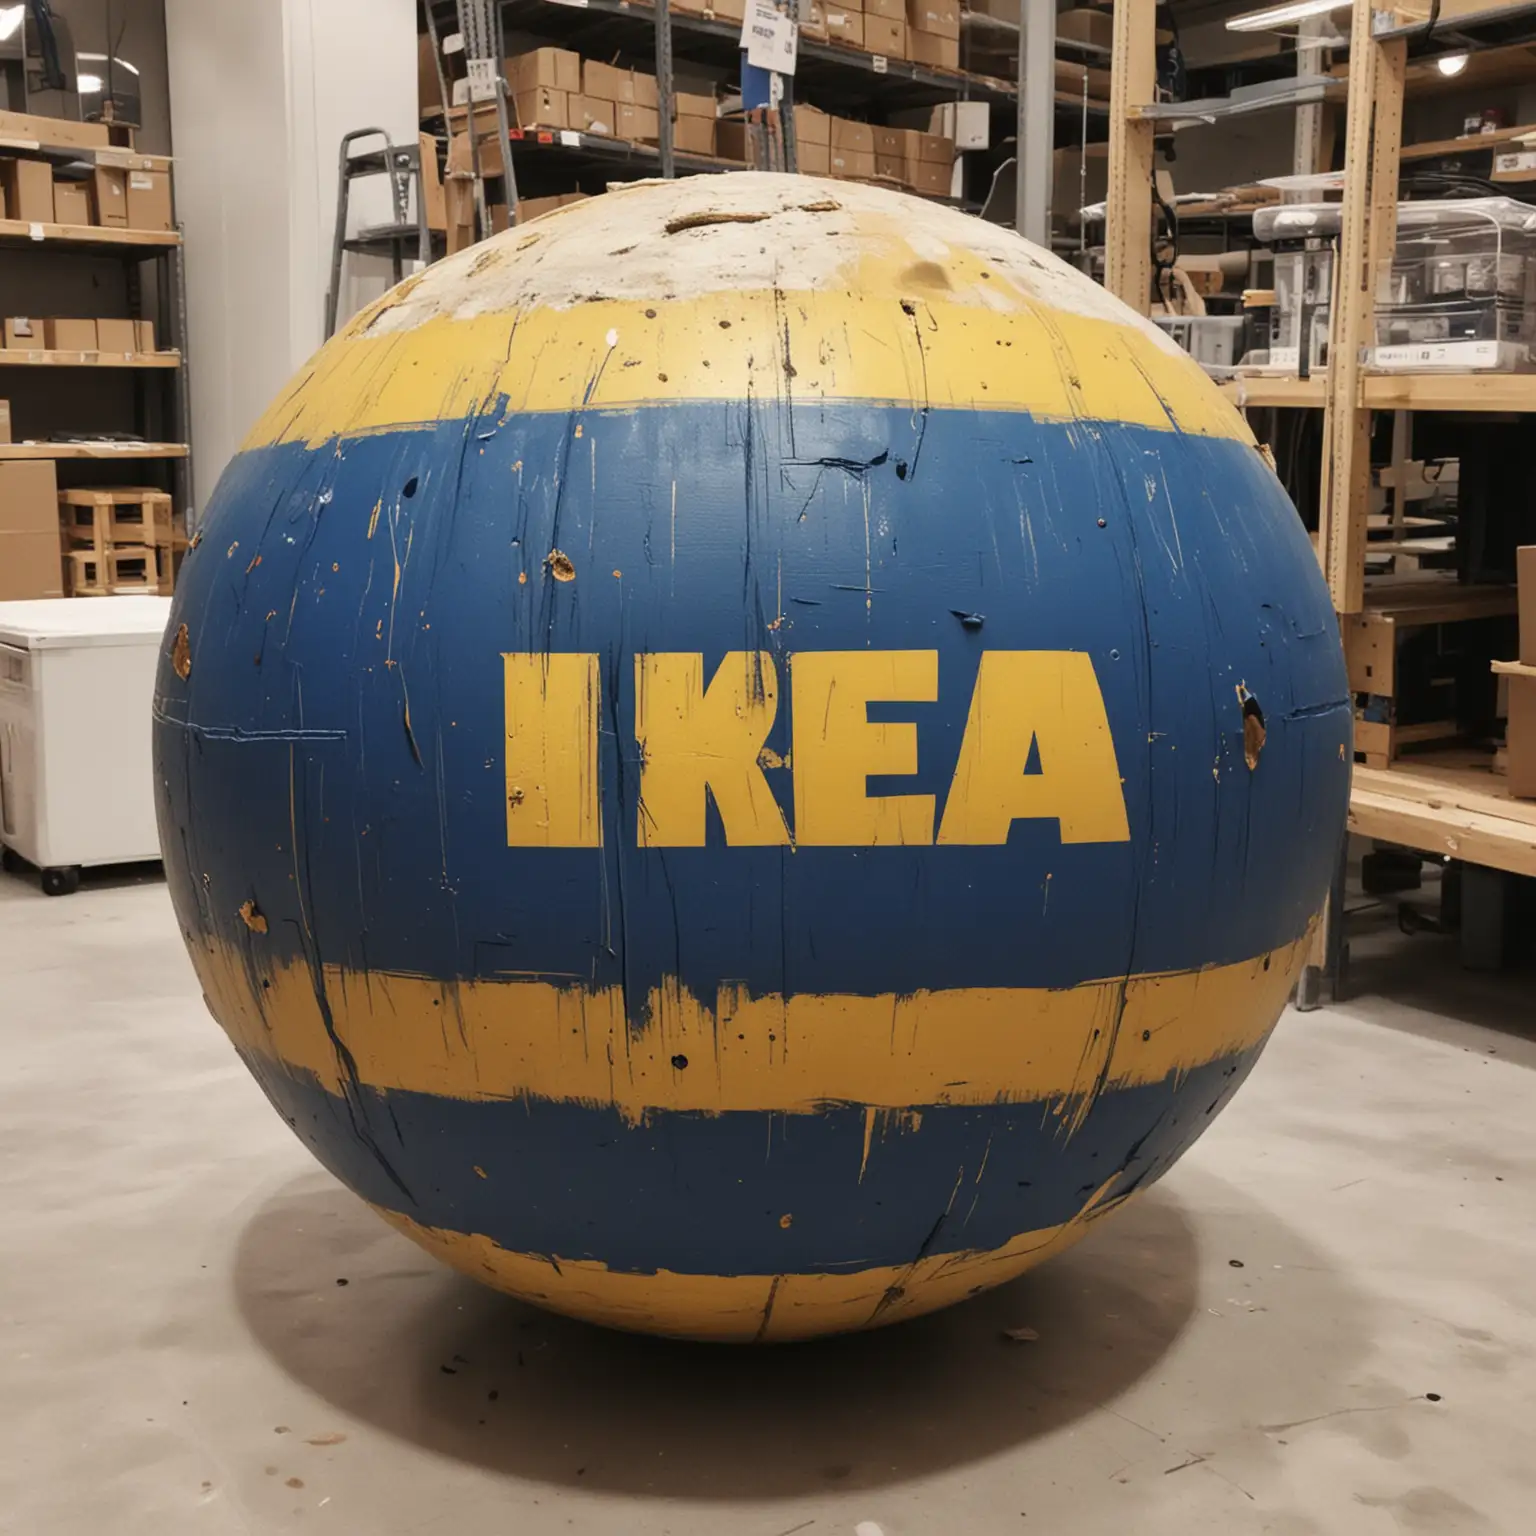 An ikea bomb with the Swedish flag painted on it